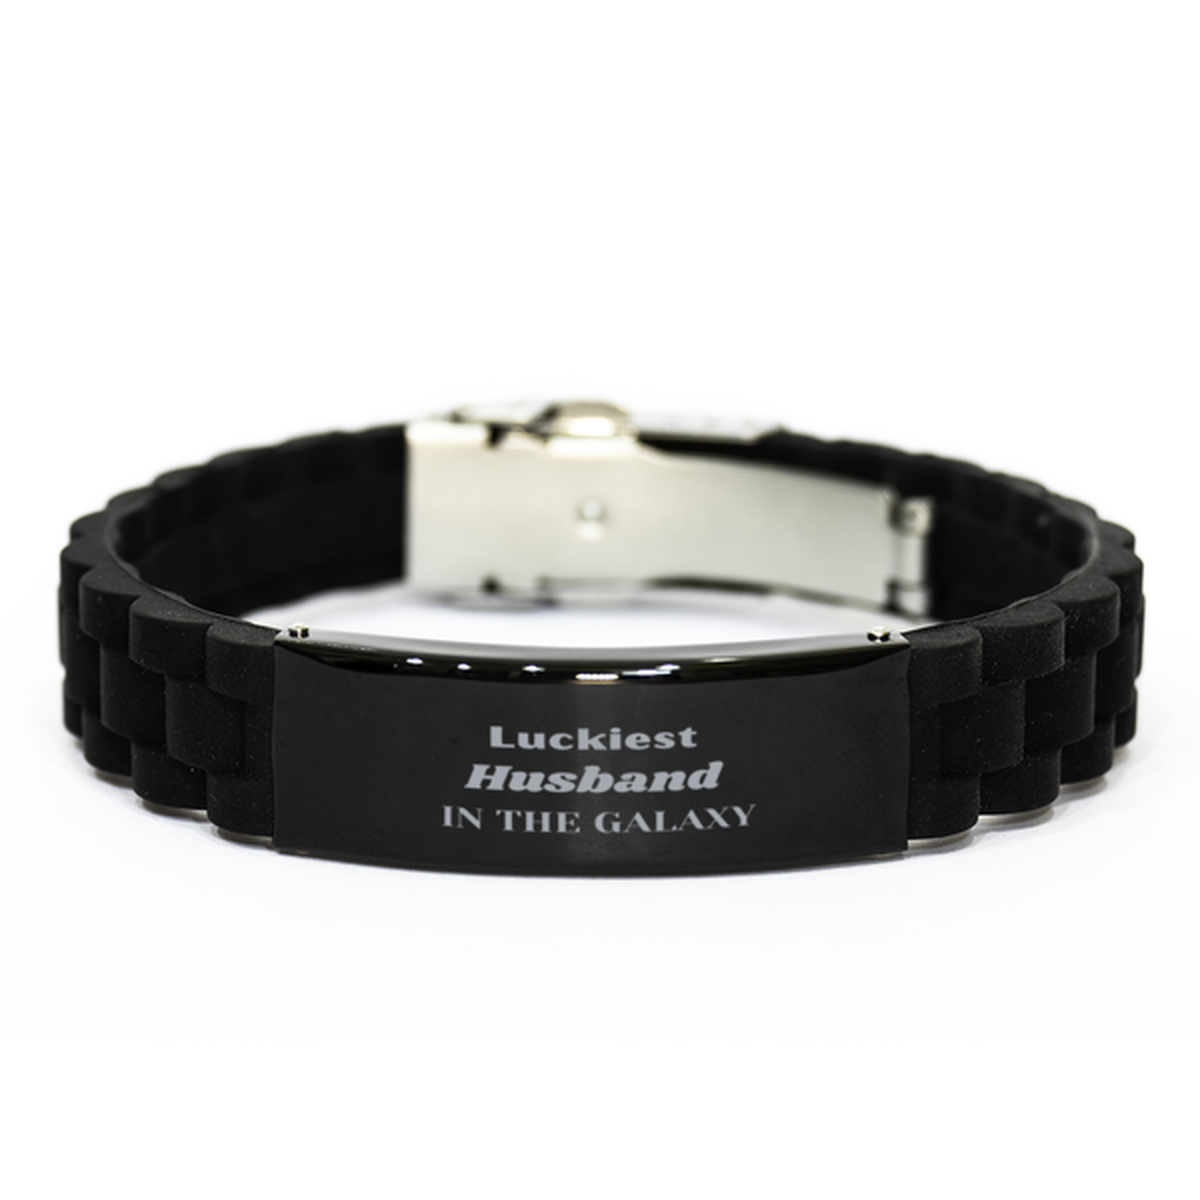 Luckiest Husband in the Galaxy, To My Husband Engraved Gifts, Christmas Husband Black Glidelock Clasp Bracelet Gifts, X-mas Birthday Unique Gifts For Husband Men Women